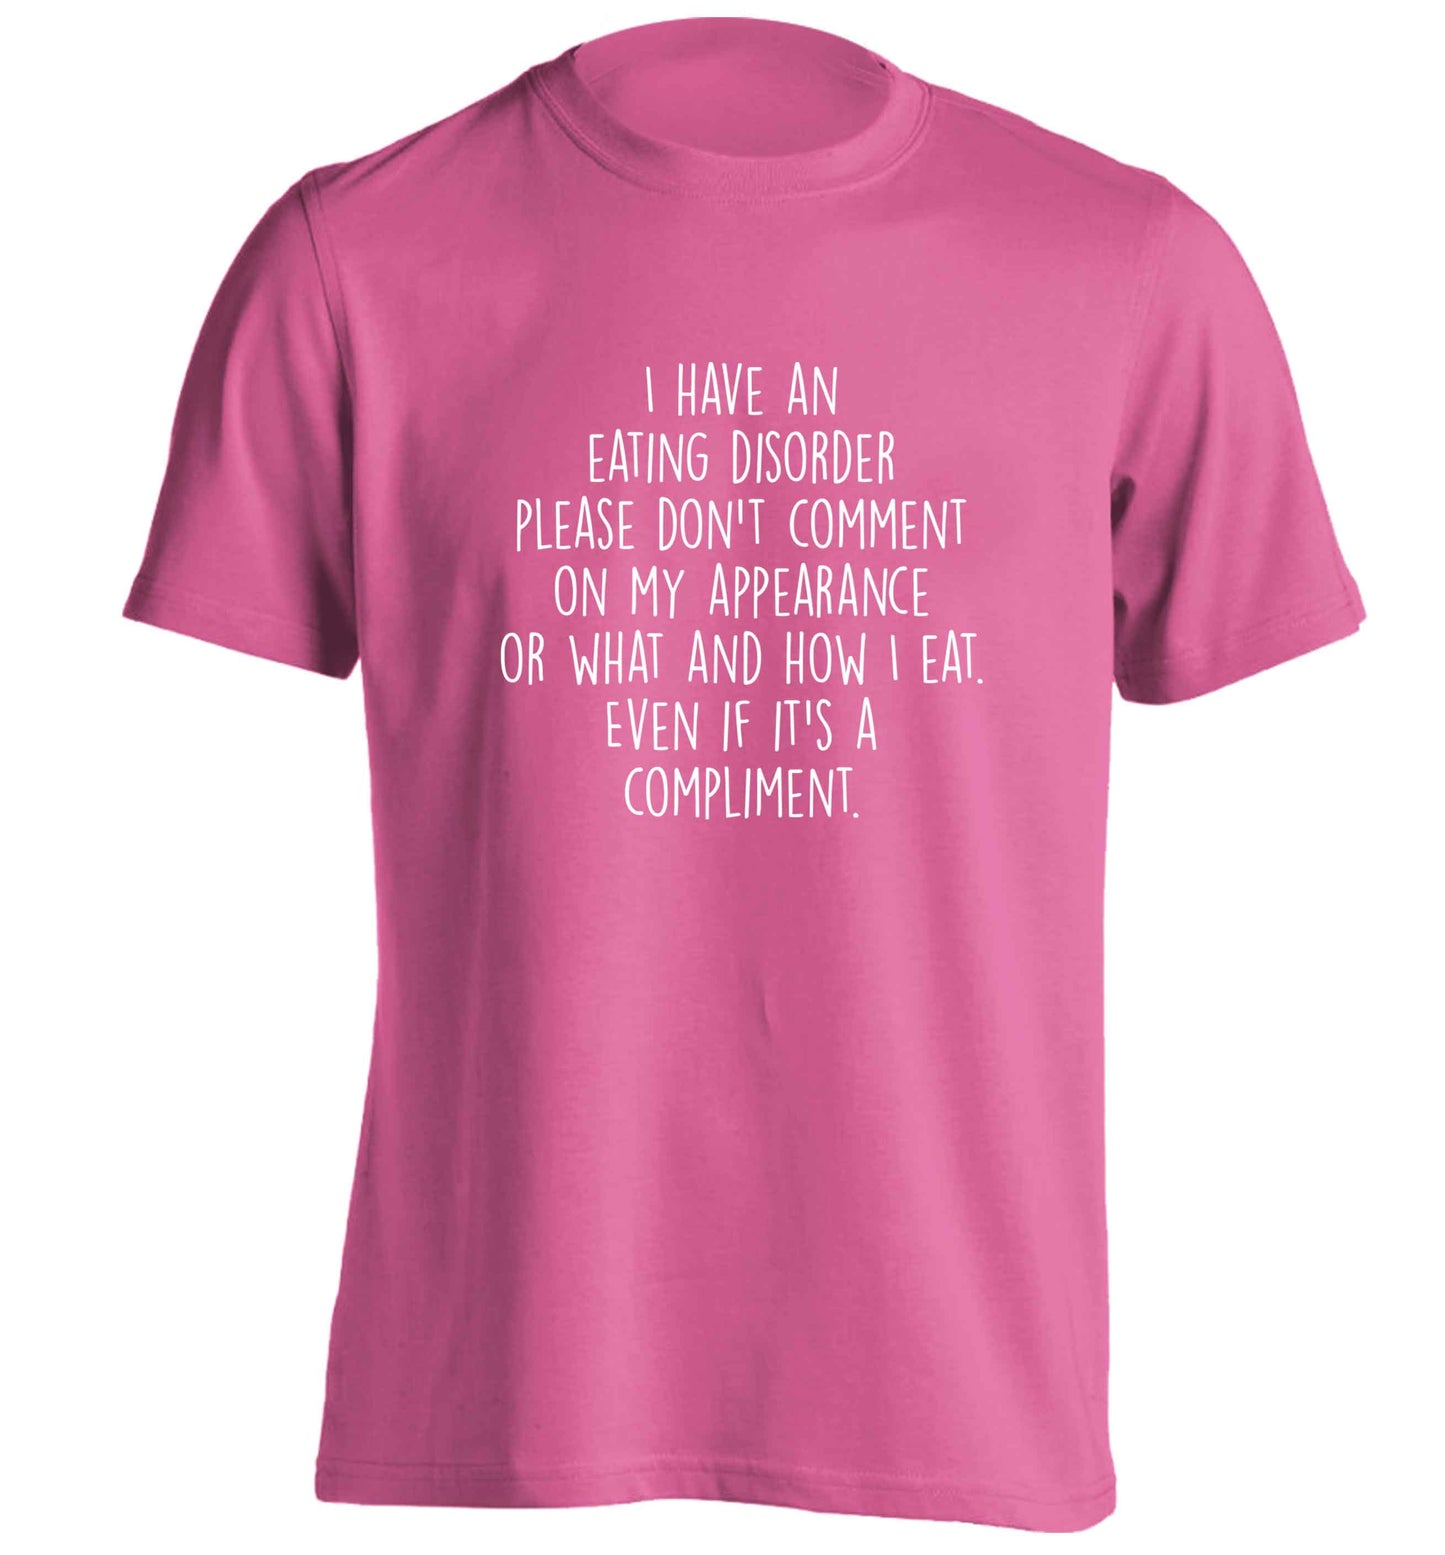 I have an eating disorder please don't comment on my appearance or what and how I eat. Even if it's a compliment adults unisex pink Tshirt 2XL